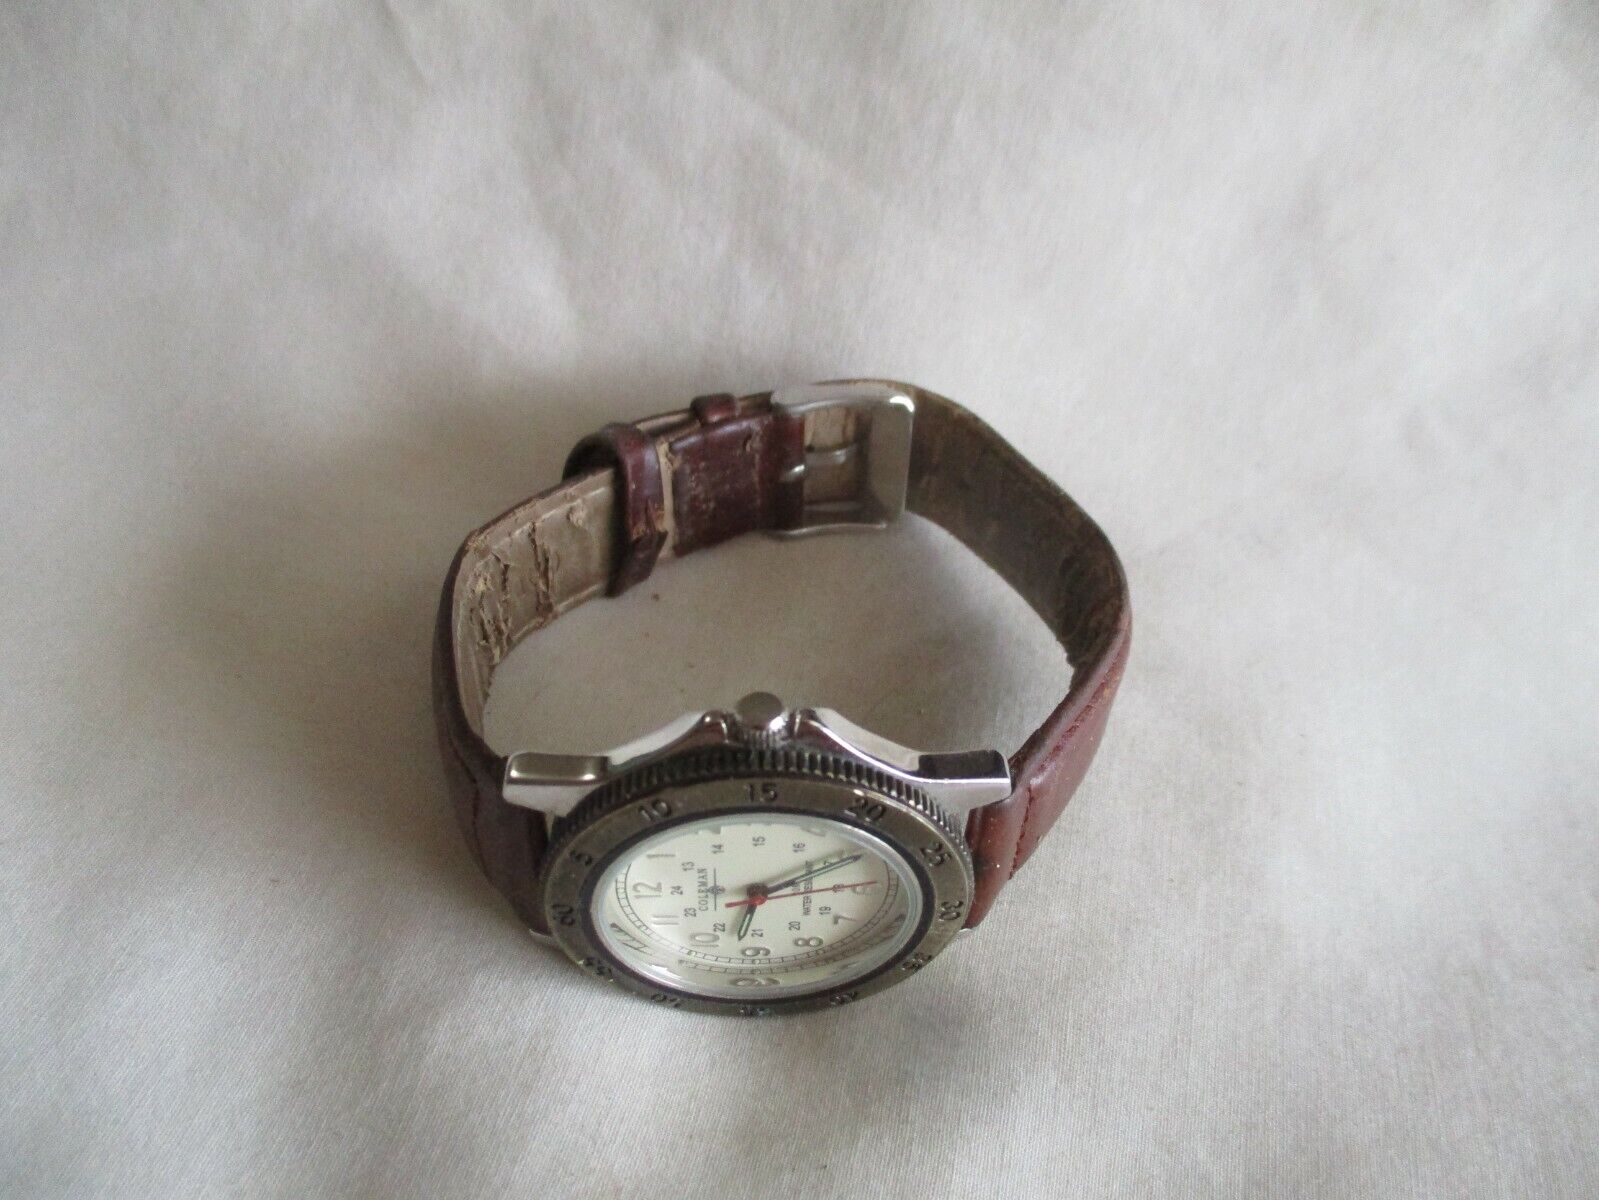 Coleman Analog Wristwatch with a Buckle Band and Water Resistance